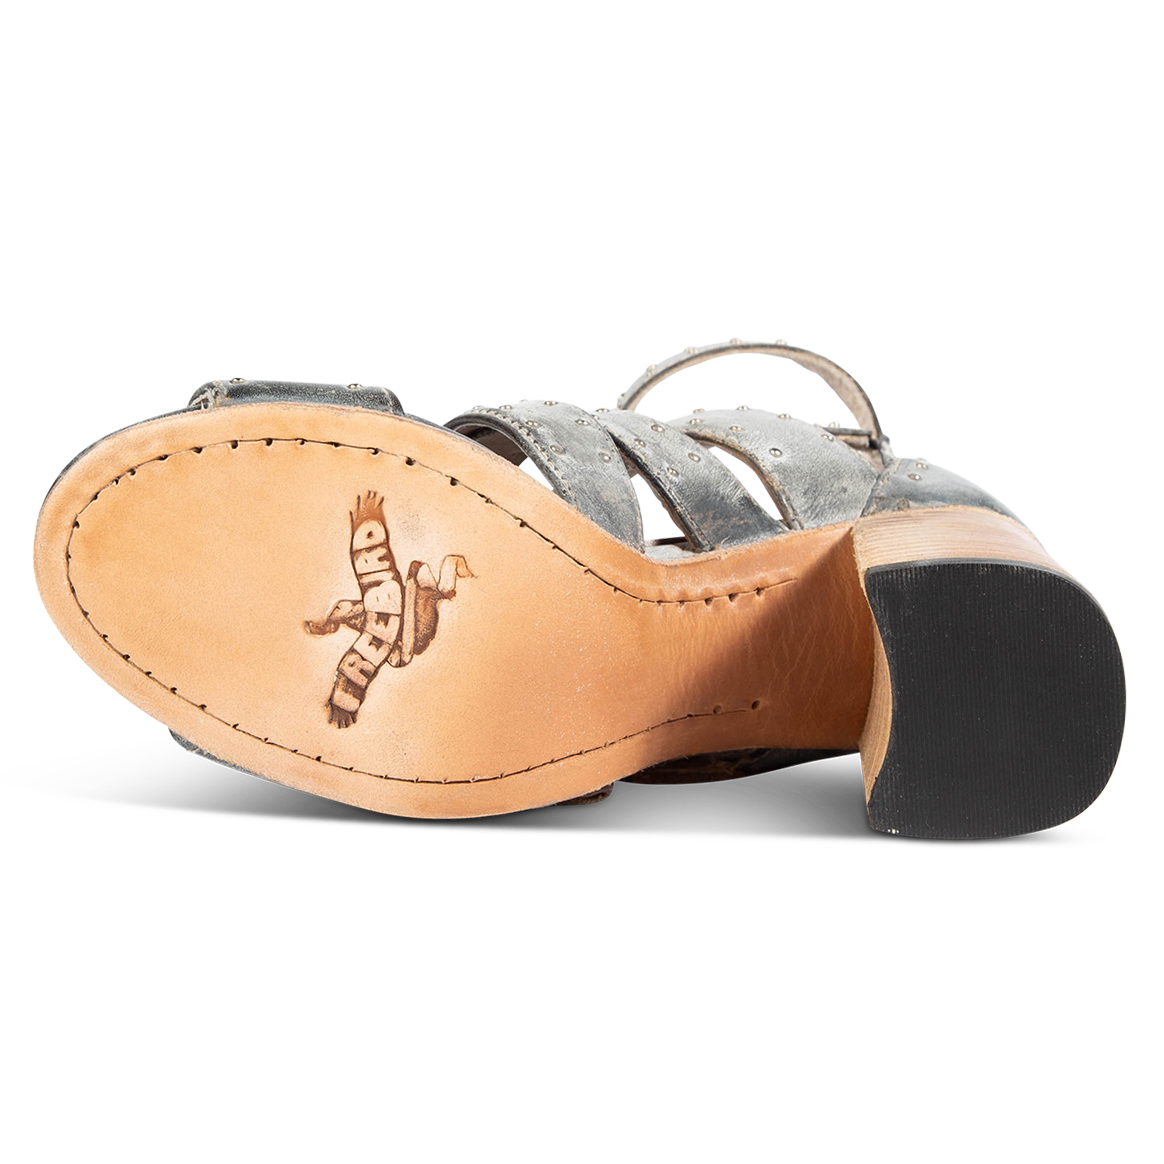 Leather sole imprinted with FREEBIRD on women's Tanica ice sandal